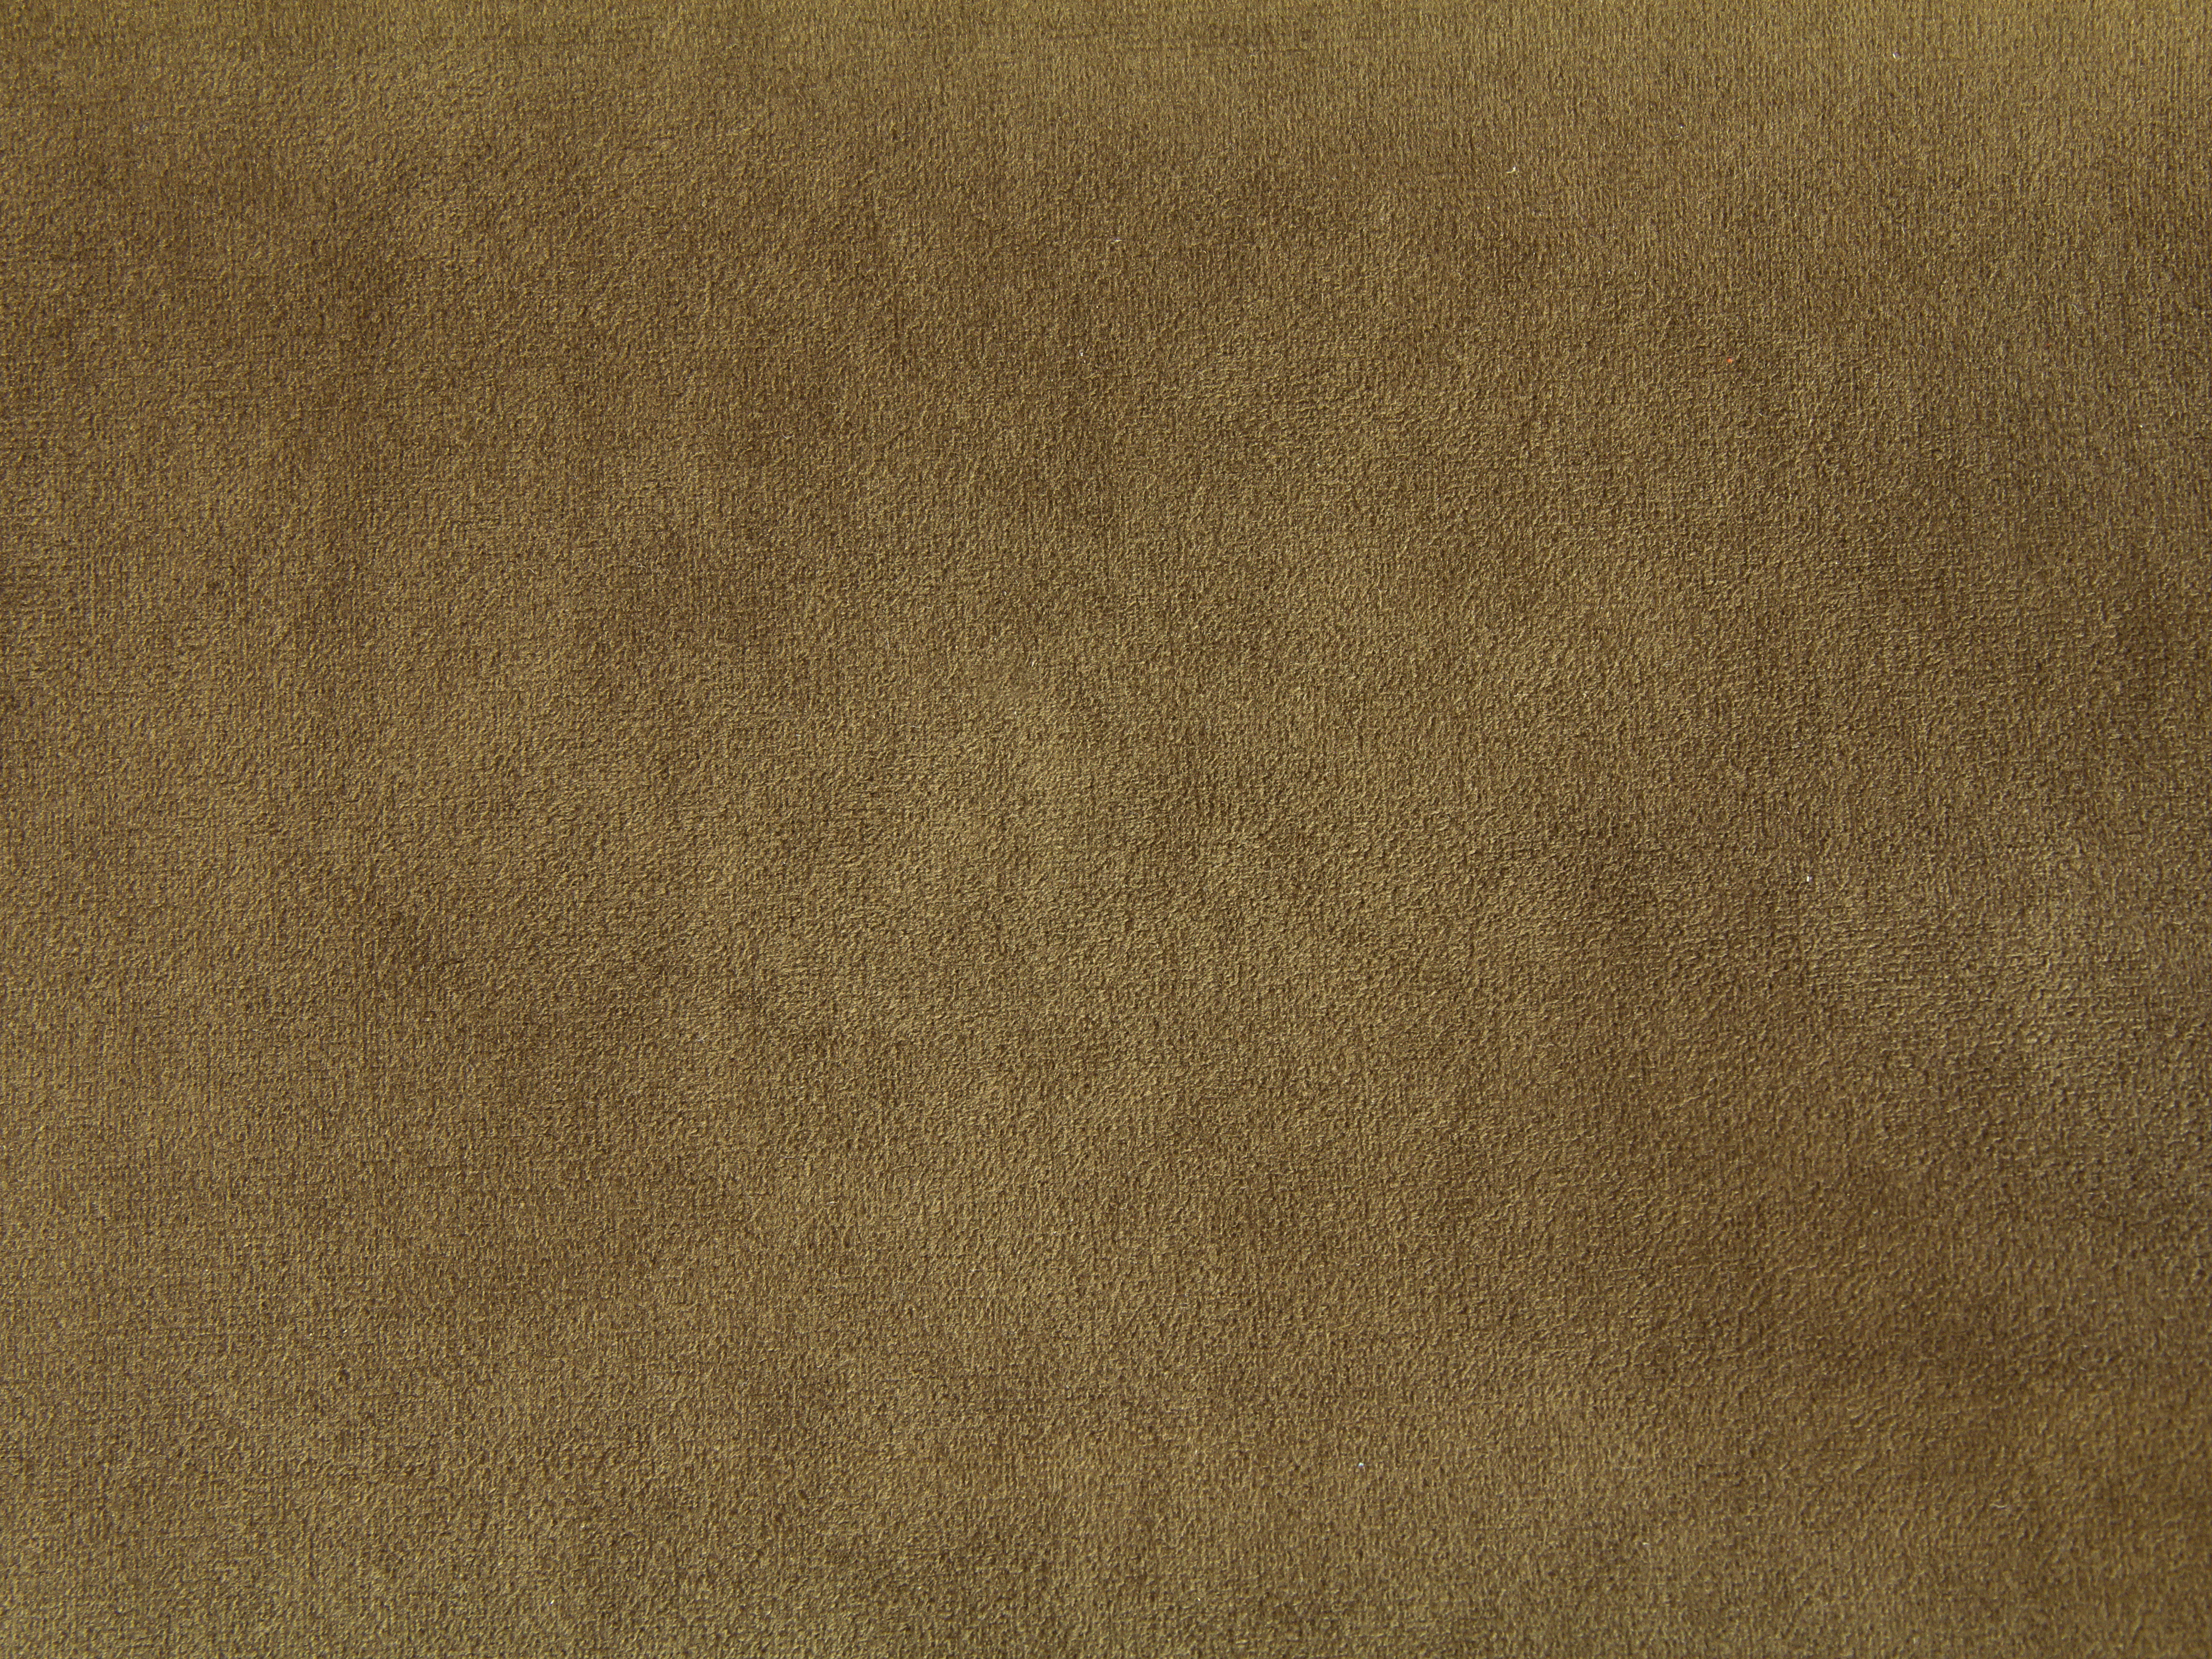 brown fabric fuzzy texture photo soft cloth stock image wallpaper